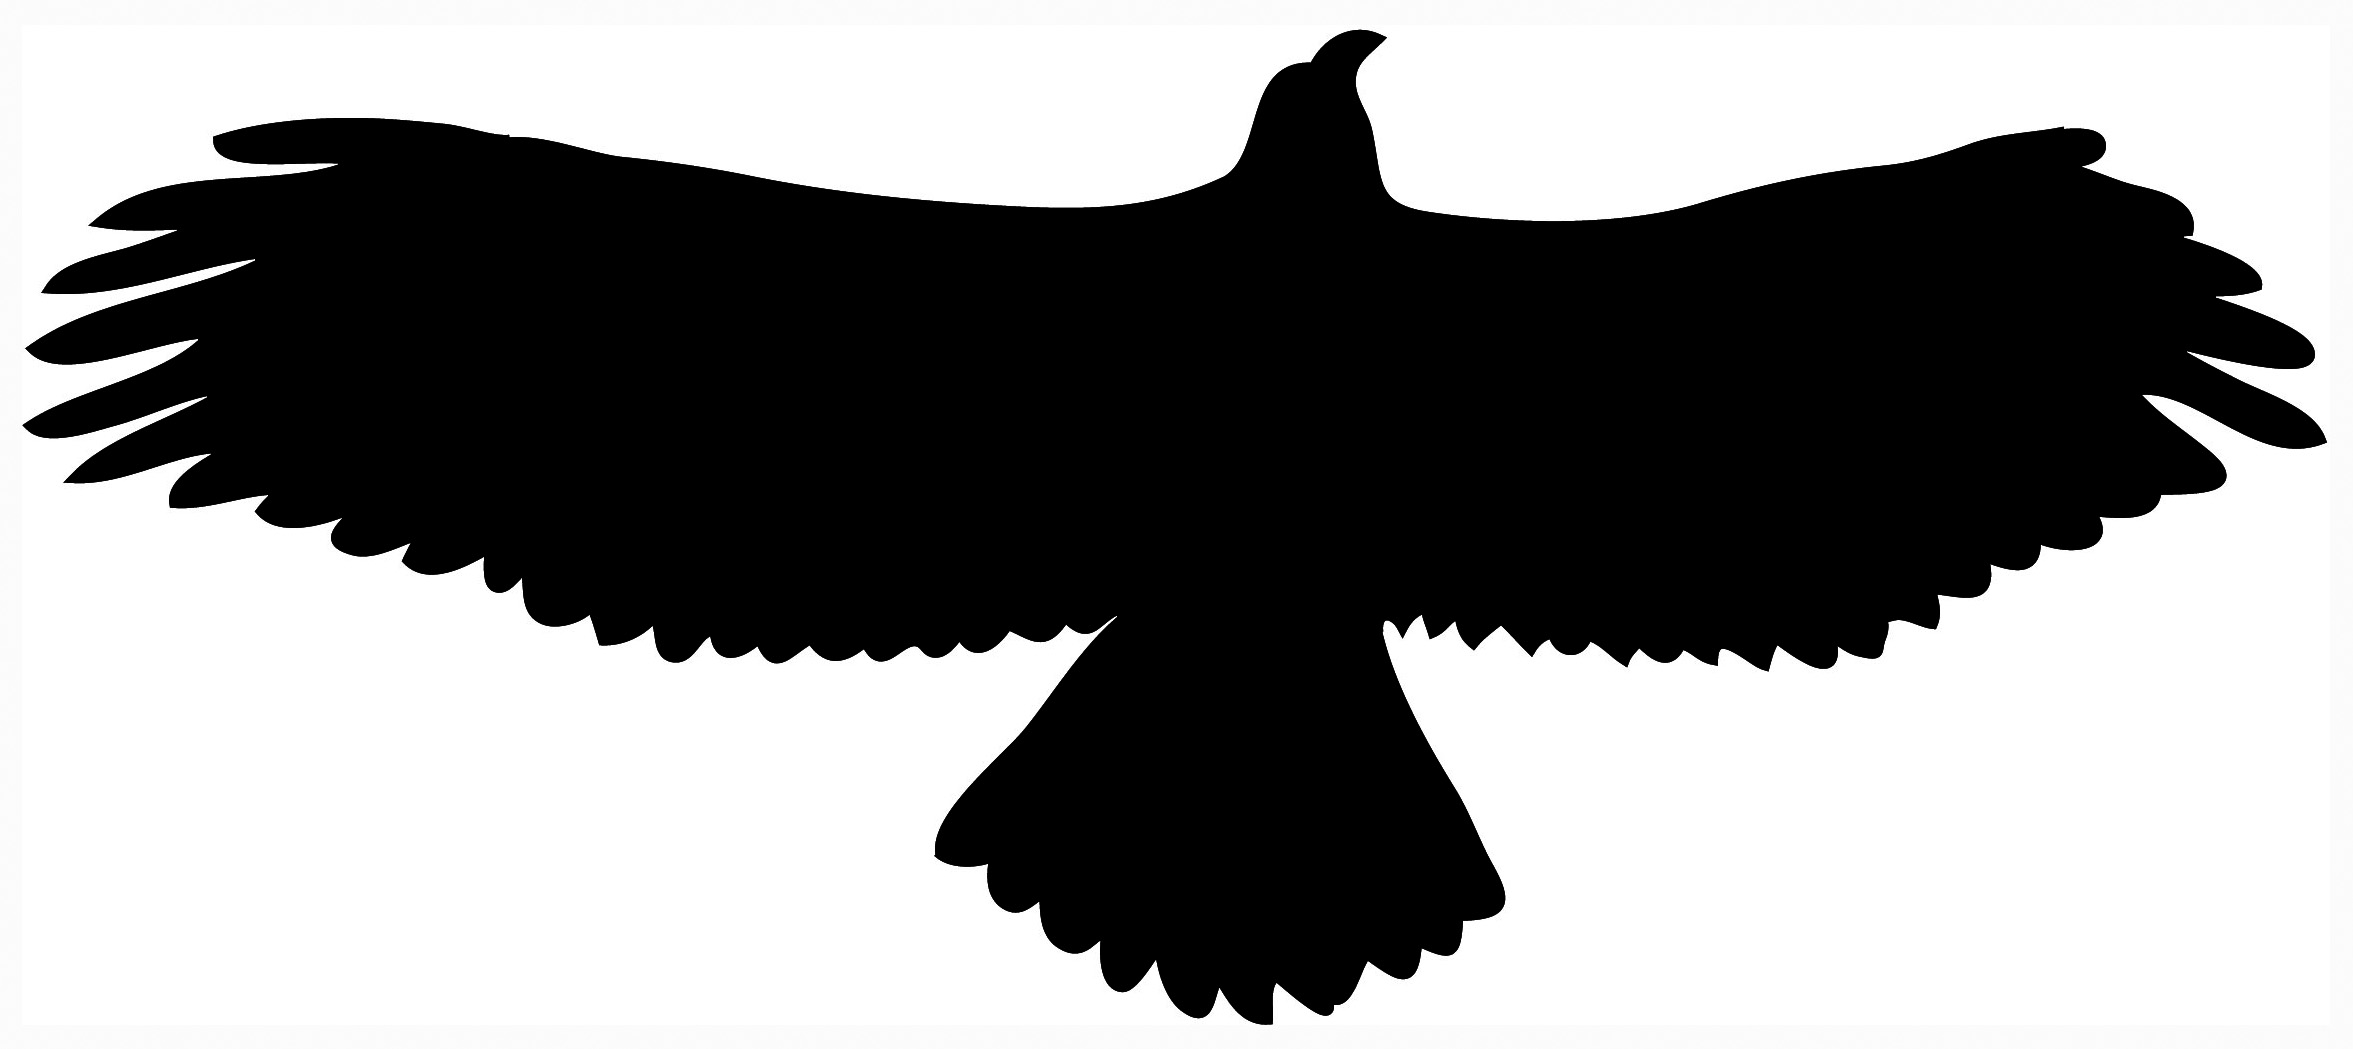 clipart of eagles flying - photo #44